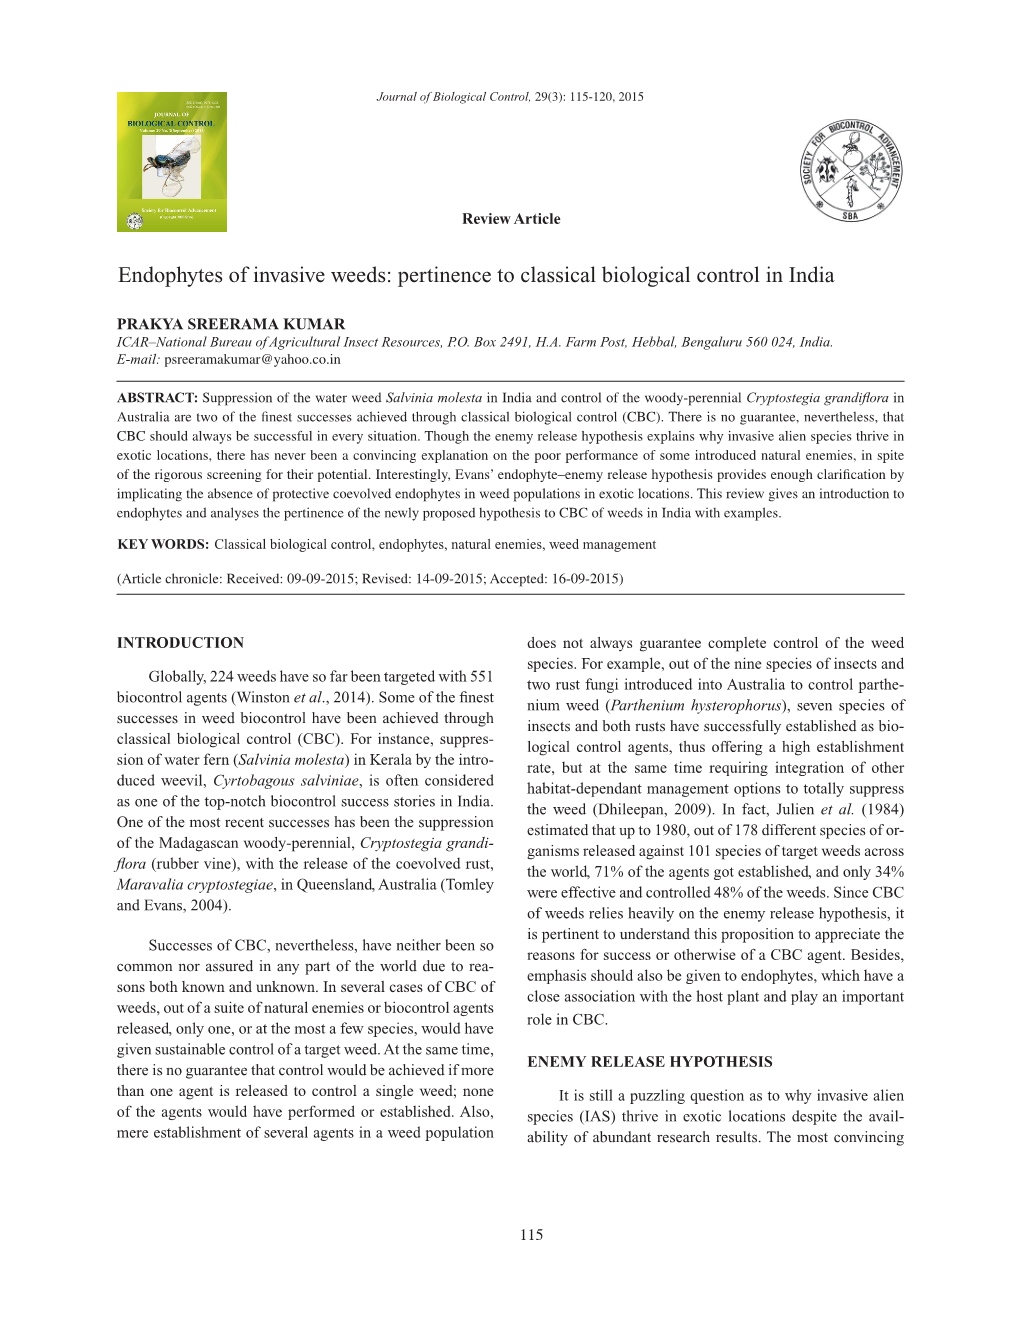 Endophytes of Invasive Weeds: Pertinence to Classical Biological Control in India